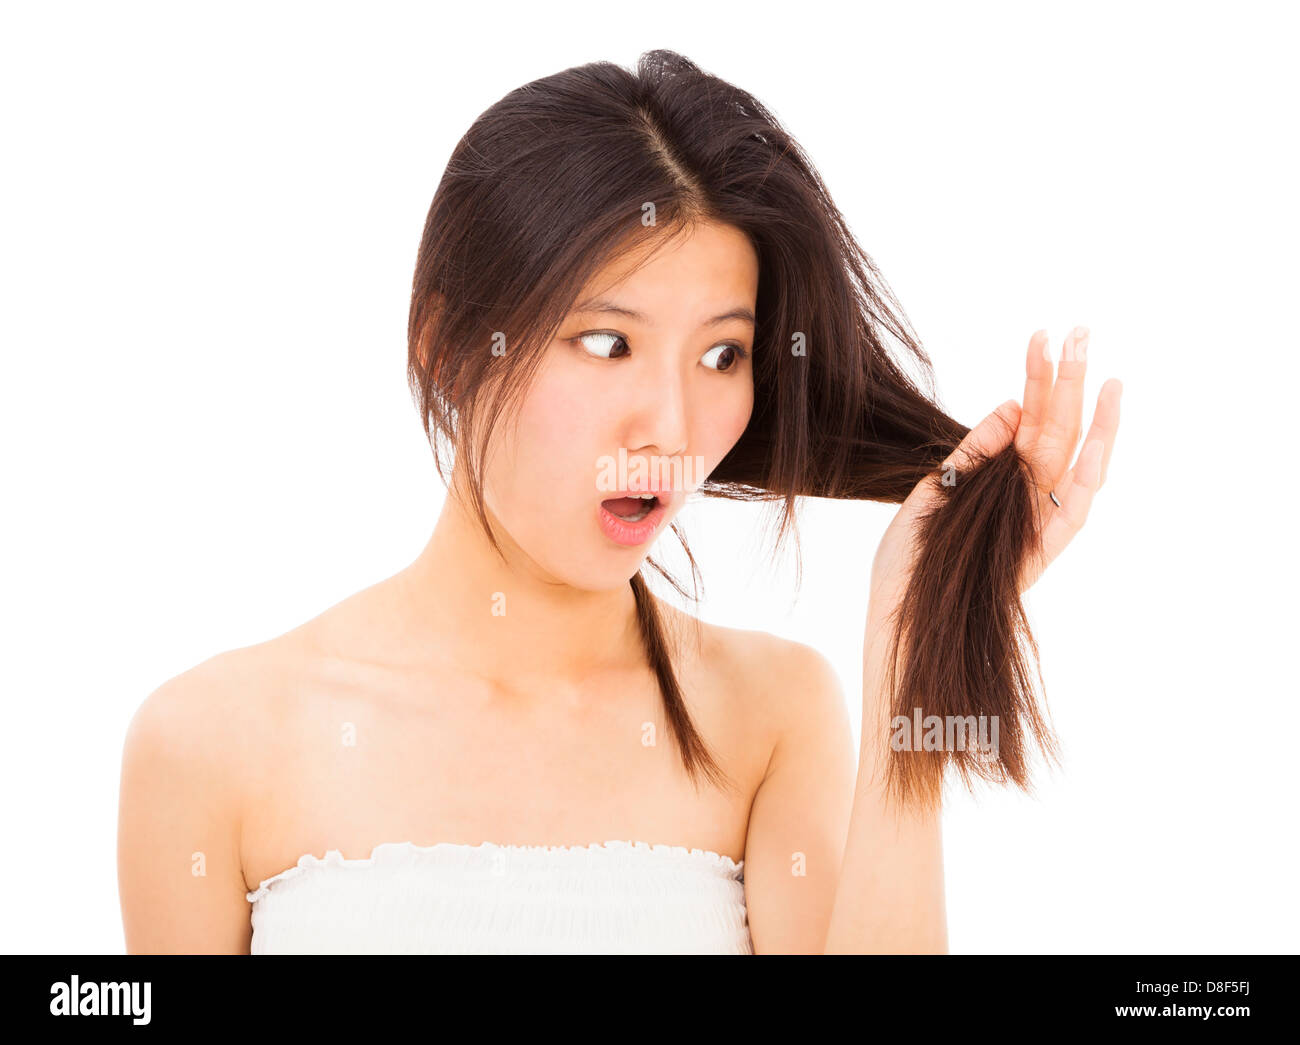 shocked woman watching the damage hair and splitting ends Stock Photo